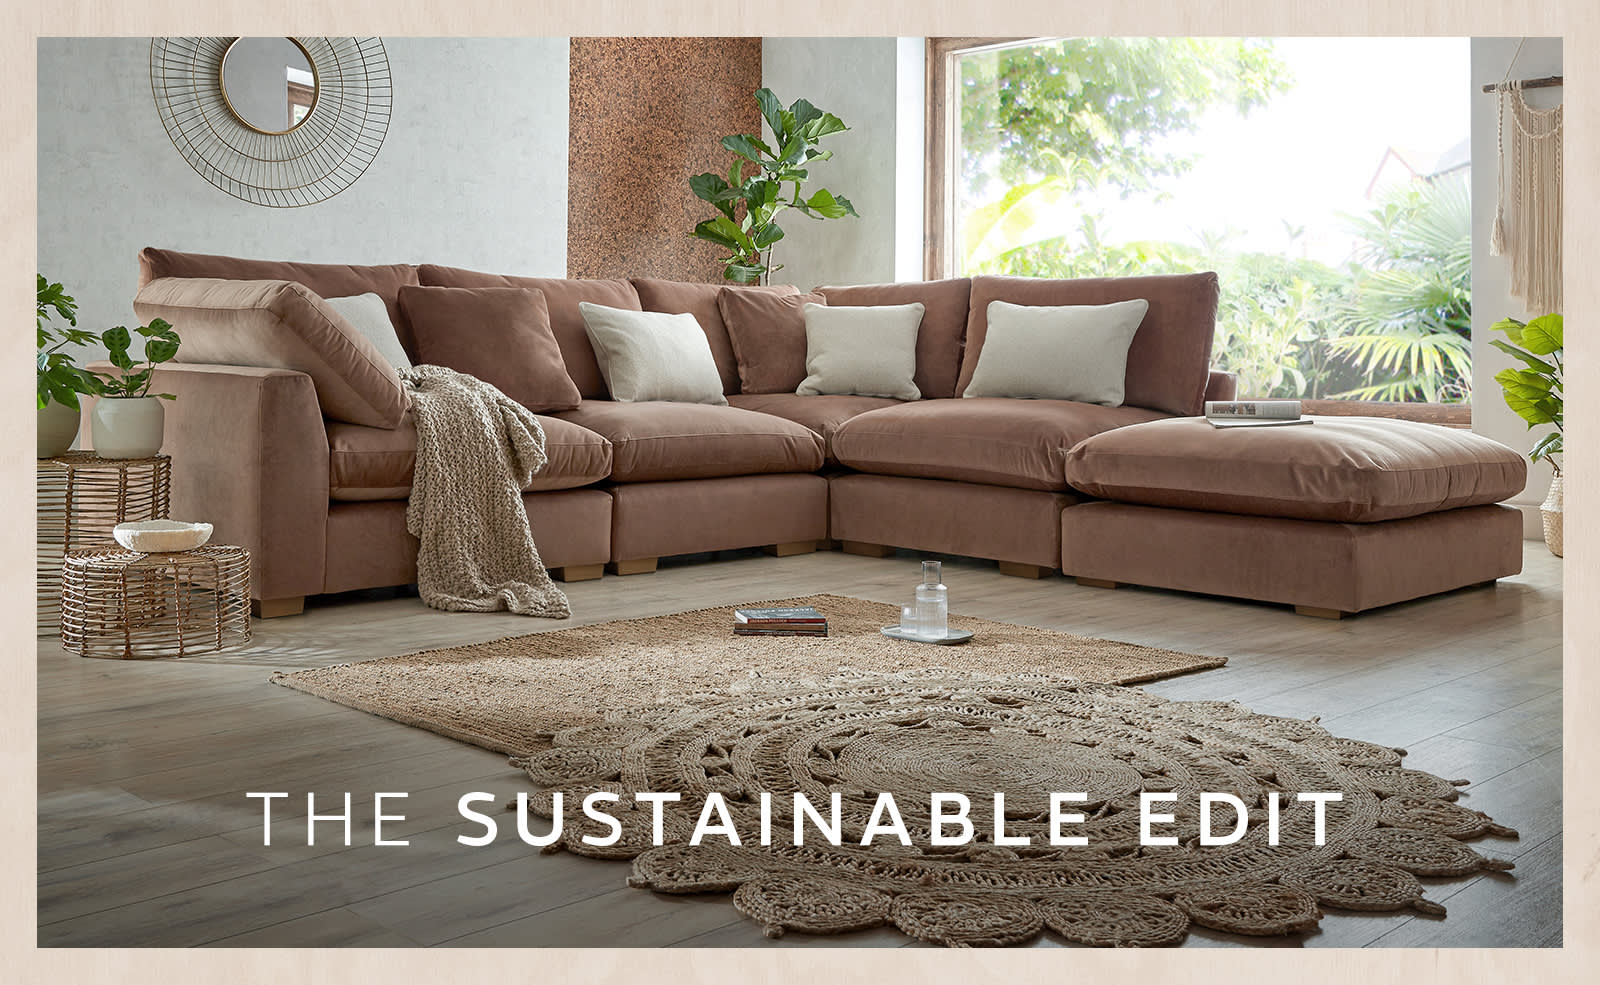 The Sustainable Edit